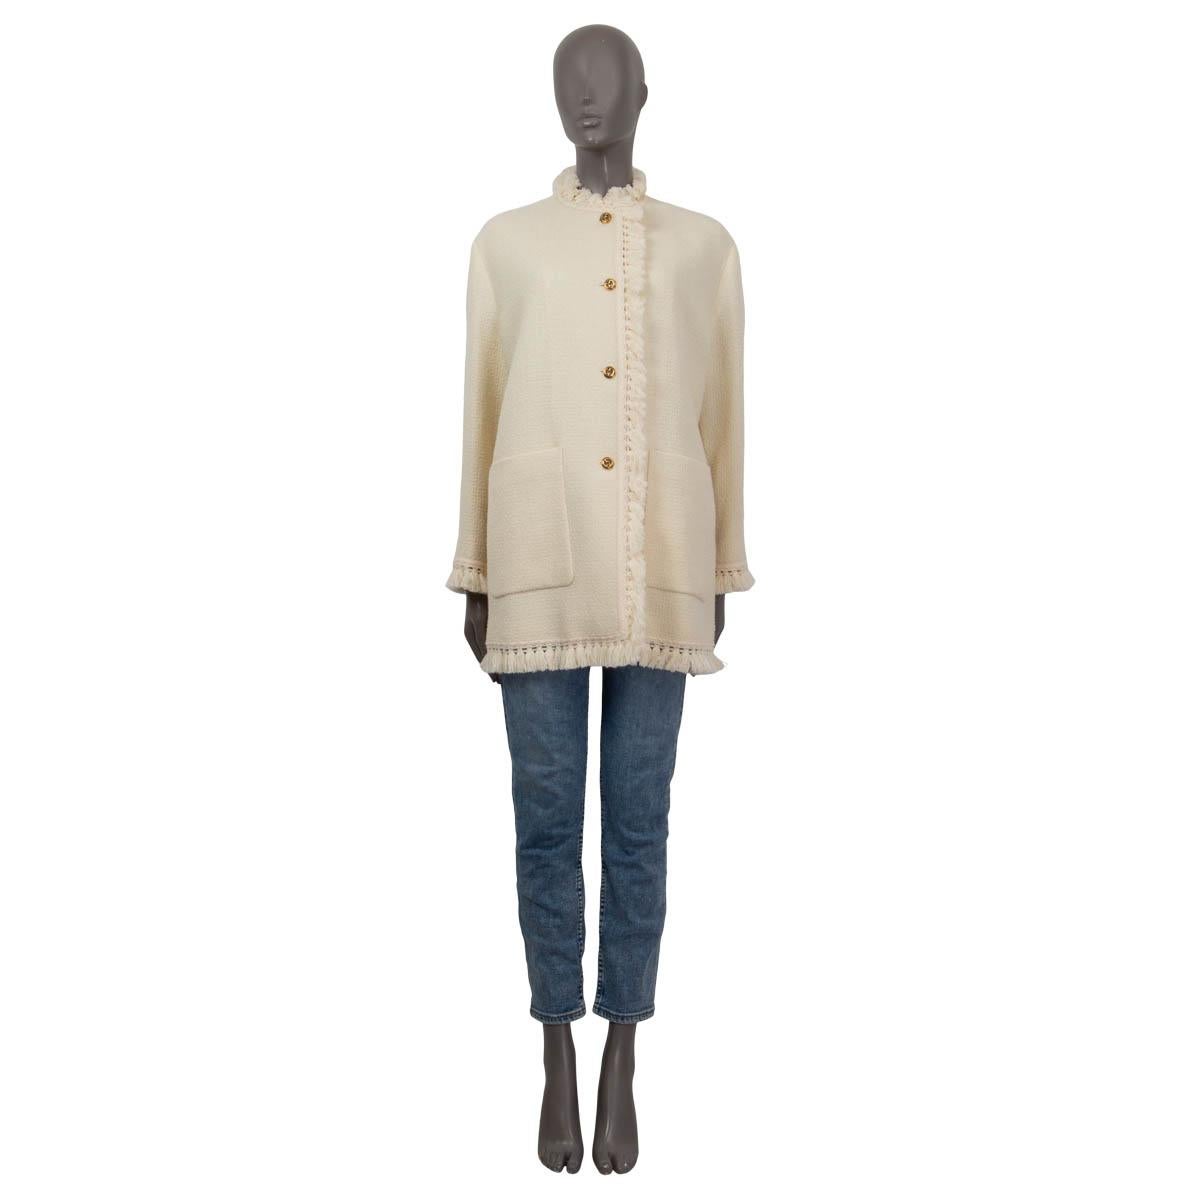 100% authentic Gucci Resort 2021 boucle jacket in ivory/white wool (100%). Features a fringed trim and two patch pockets on the front. Has belt loops but unfortunately the belt is missing. Opens with four gold-tone 'GG' buttons on the front. Lined